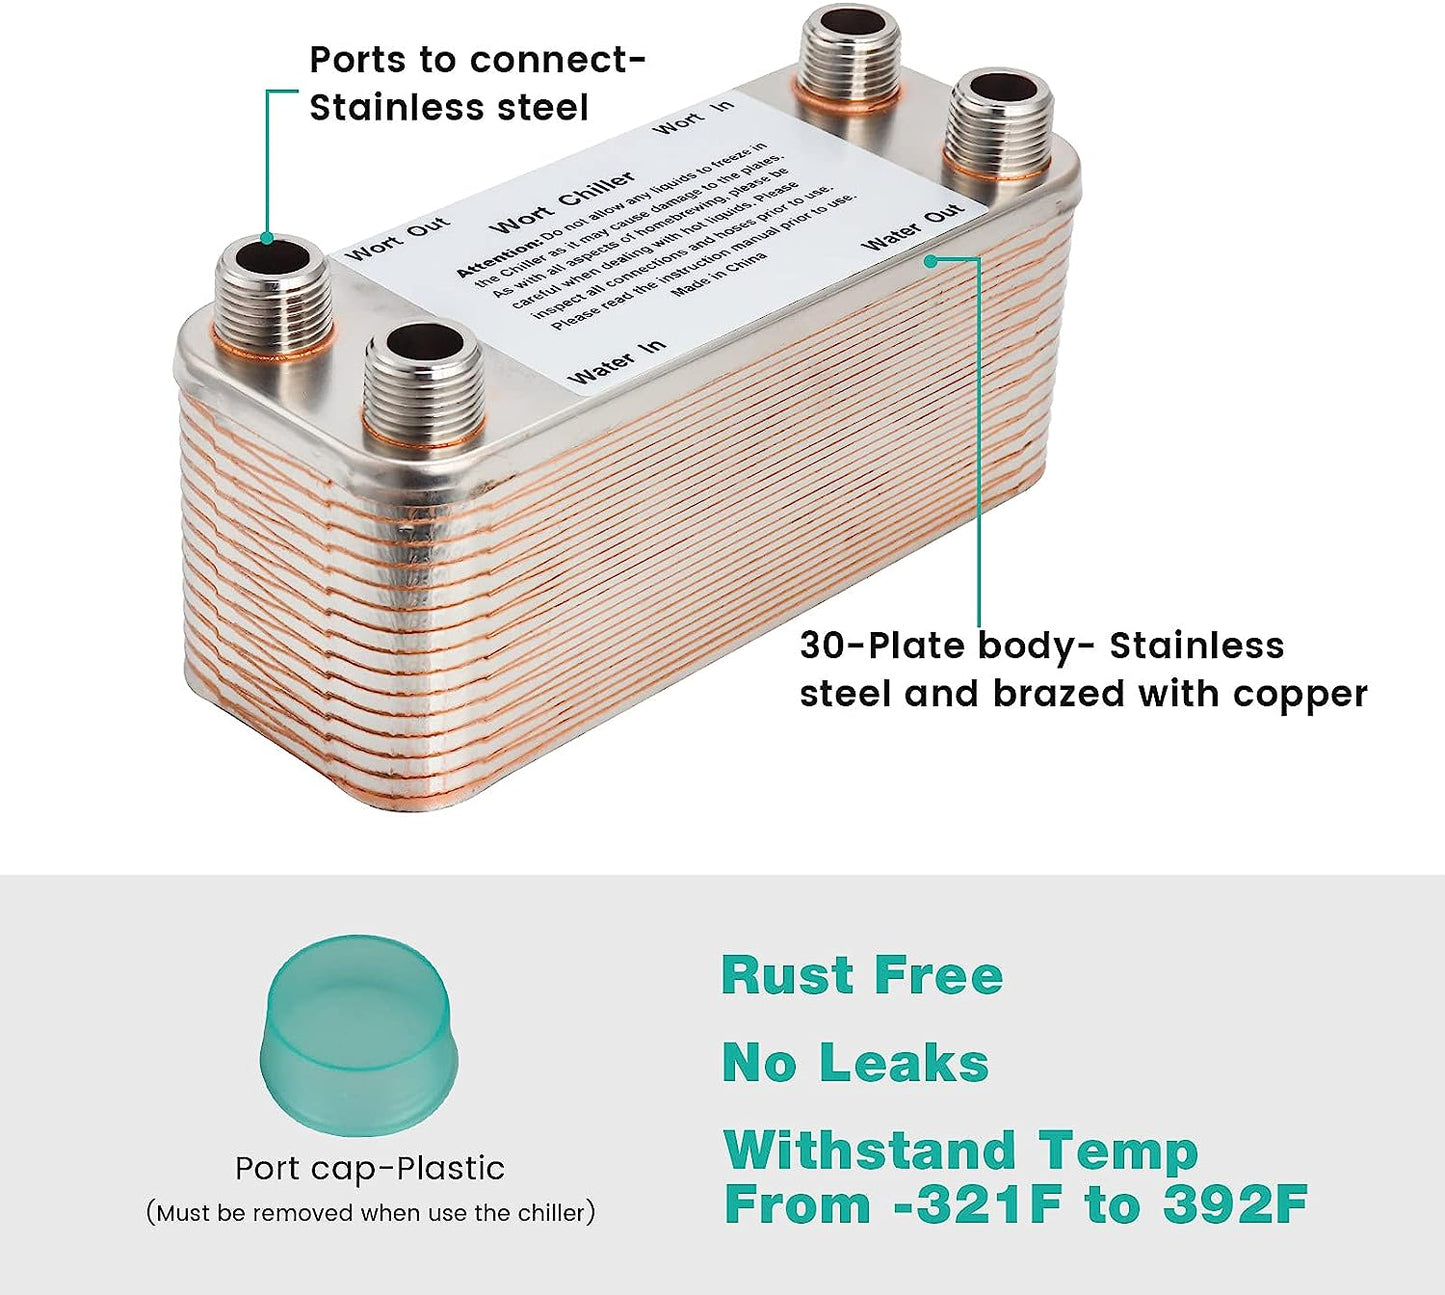 【30 Plates】 Homebrew Wort Chiller, Stainless Steel and Brazed with Copper Heat Exchanger, 1/2 NPT Thread Connection Hot Liquid Accelerated Cooler